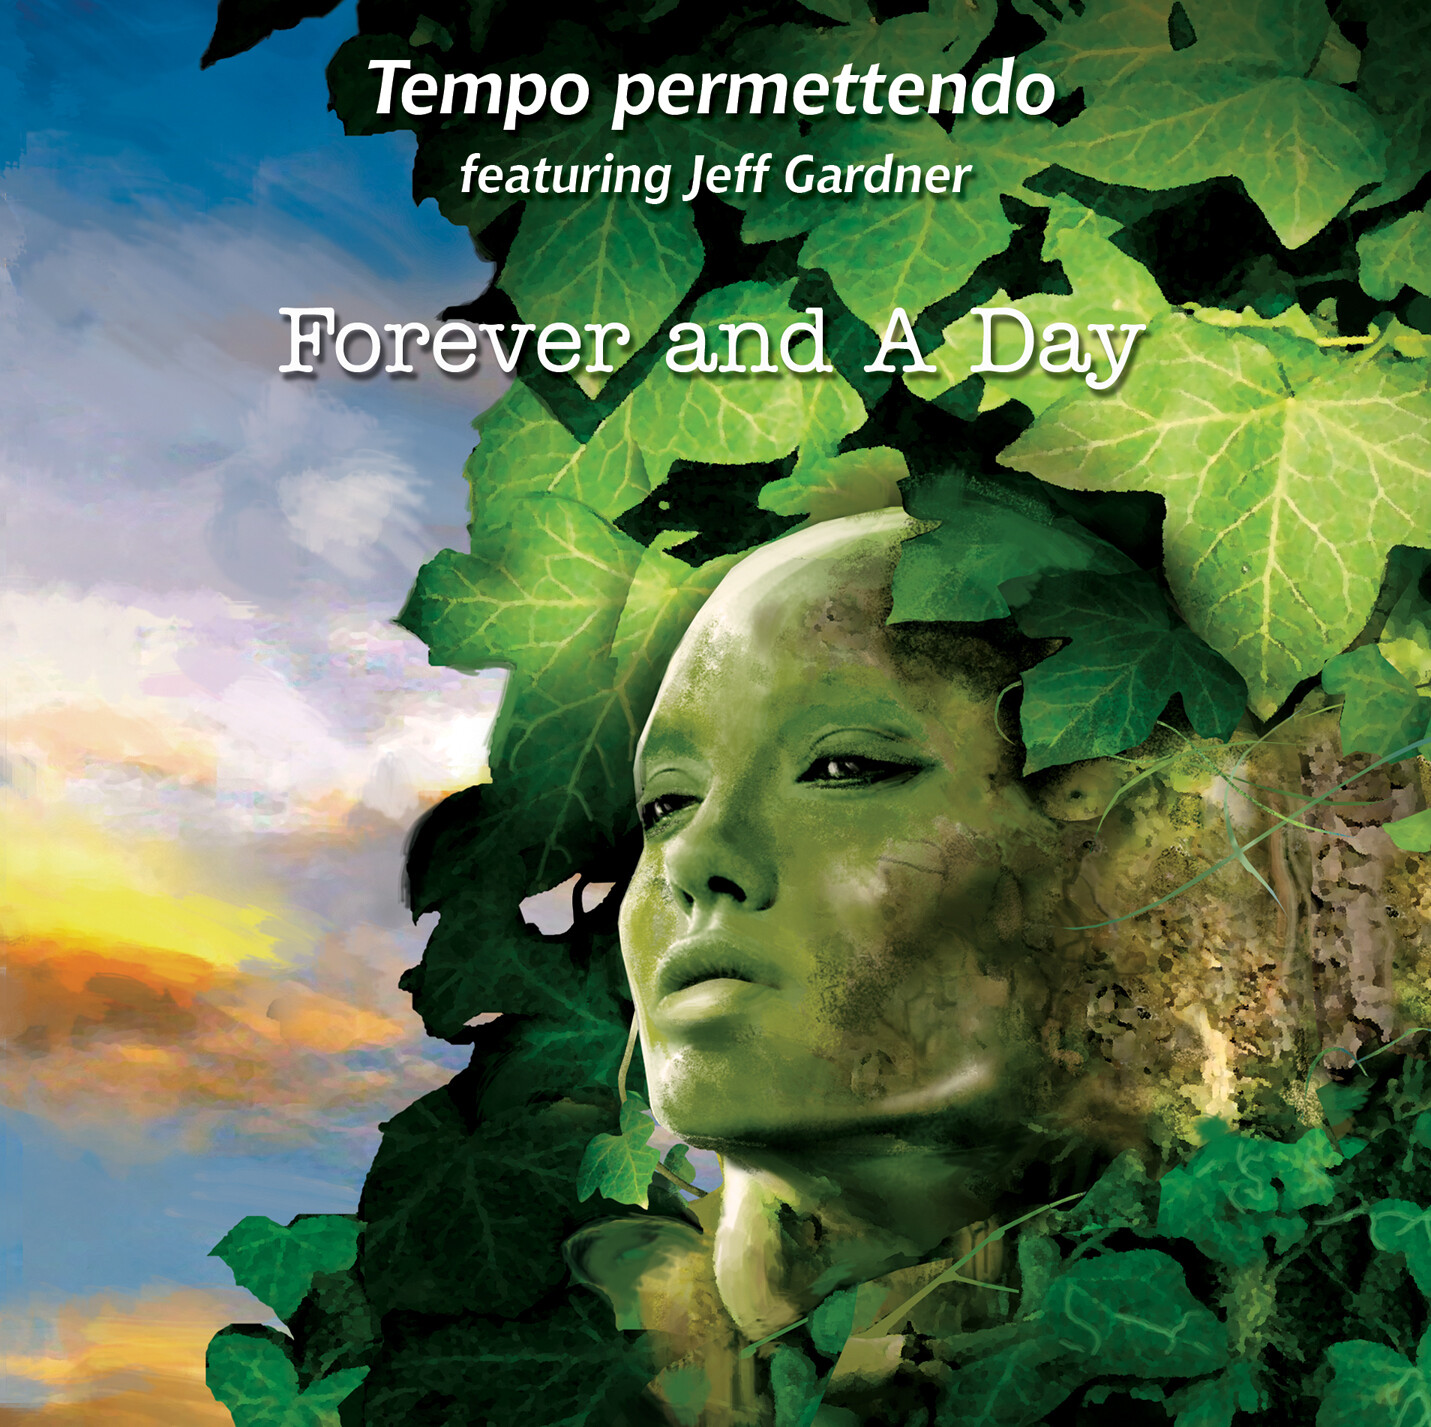 TEMPO PERMETTENDO feat. JEFF GARDNER «Forever and a day»